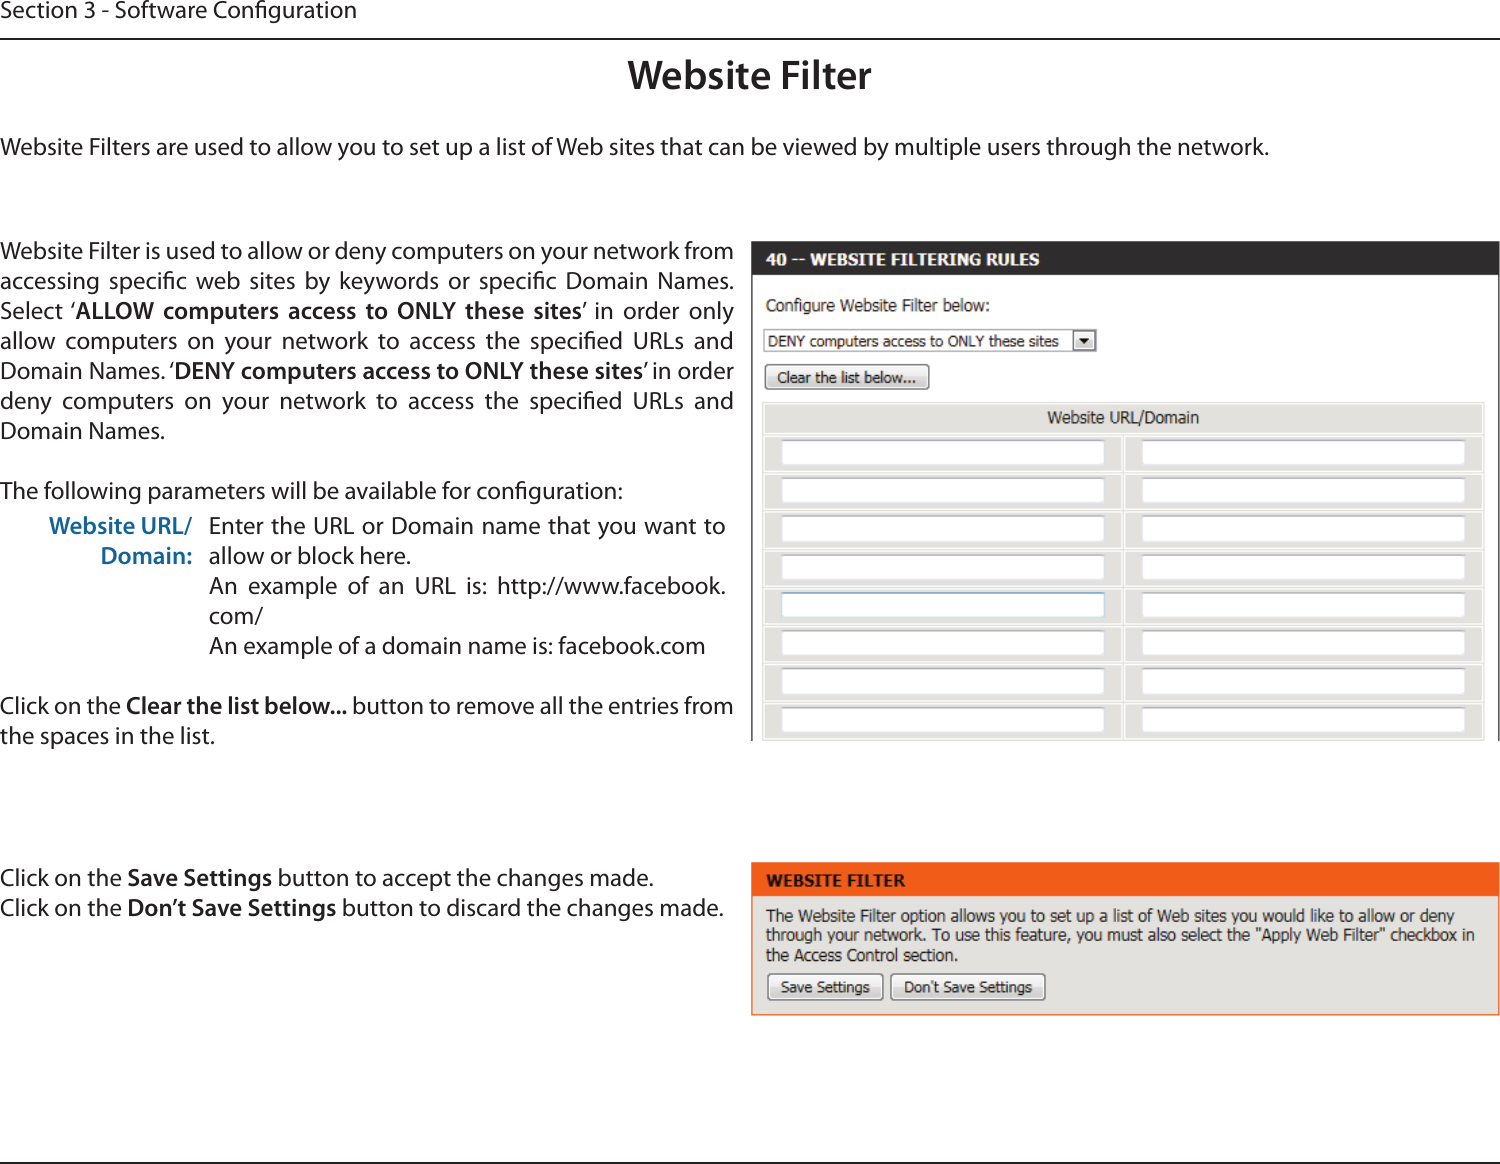 Section 3 - Software CongurationWebsite FilterWebsite Filters are used to allow you to set up a list of Web sites that can be viewed by multiple users through the network.Website Filter is used to allow or deny computers on your network from accessing  specic  web  sites  by  keywords  or  specic  Domain  Names. Select ‘ALLOW  computers  access  to  ONLY  these  sites’  in  order  only allow  computers  on  your  network  to  access  the  specied  URLs  and Domain Names. ‘DENY computers access to ONLY these sites’ in order deny  computers  on  your  network  to  access  the  specied  URLs  and Domain Names.The following parameters will be available for conguration:Website URL/Domain:Enter the URL or Domain name that you want to allow or block here.An  example  of  an  URL  is:  http://www.facebook.com/An example of a domain name is: facebook.comClick on the Clear the list below... button to remove all the entries from the spaces in the list.Click on the Save Settings button to accept the changes made.Click on the Don’t Save Settings button to discard the changes made.